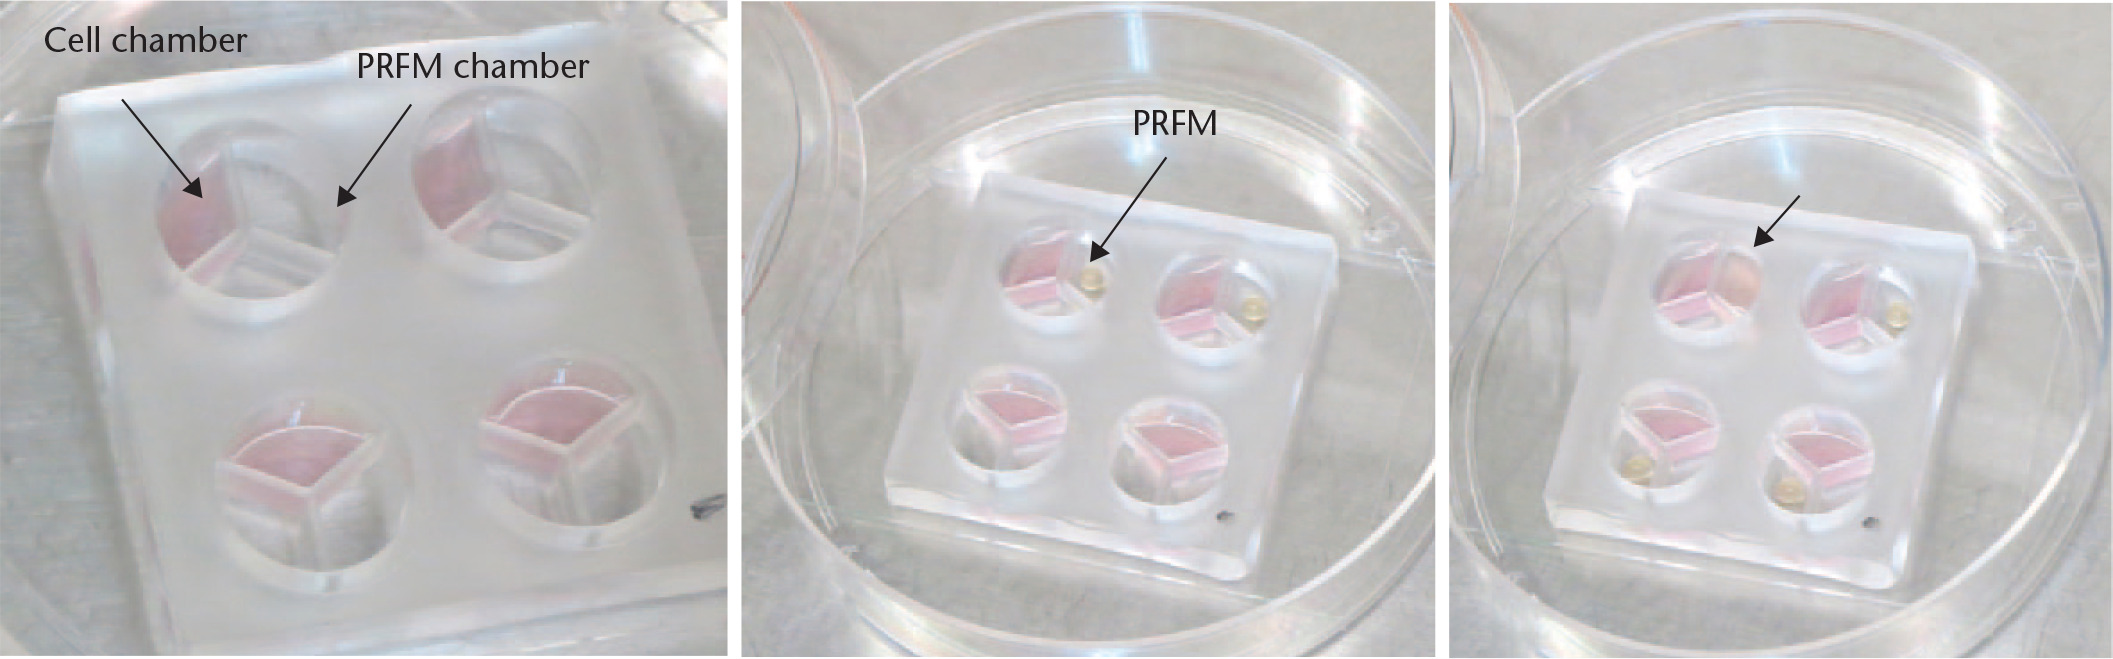 Fig. 2 
            The co-culture device design. a) Tenocytes seeded in the cell chamber. b) Platelet-rich fibrin matrix (PRFM) was added into the PRFM chamber to avoid the gelling effect. c) Culture medium (arrow) was added into the PRFM chamber until the fluid level crossed over the separation polydimethylsiloxane (PDMS) barrier, causing growth factors dispersed in the culture medium to be disseminated to the cell chamber to stimulate tenocyte proliferation.
          